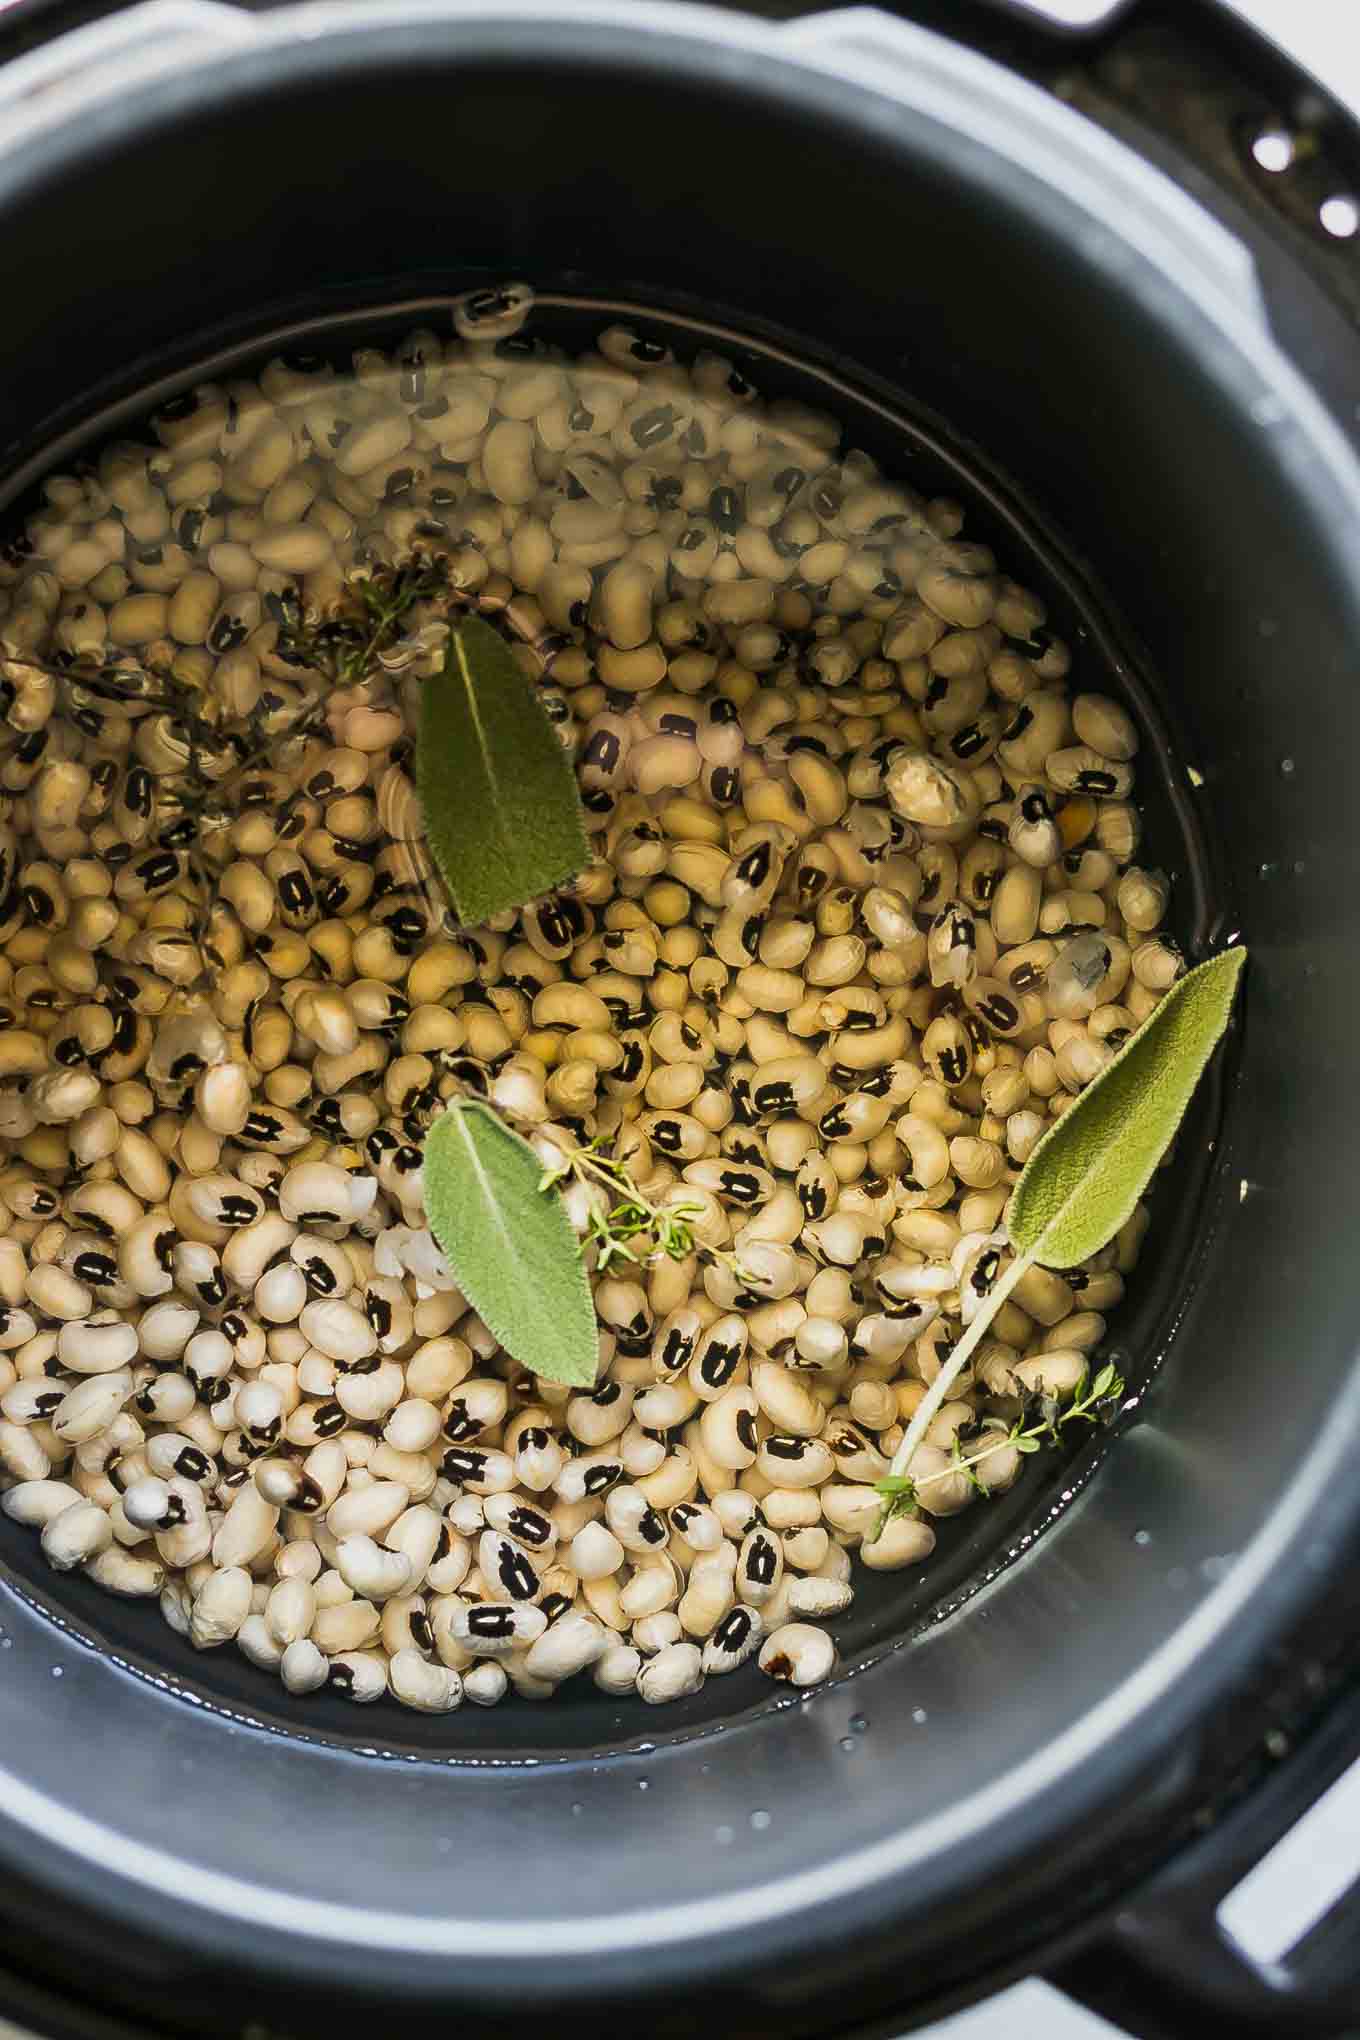 black eyed peas, water, and herbs inside an instant pot before cooking